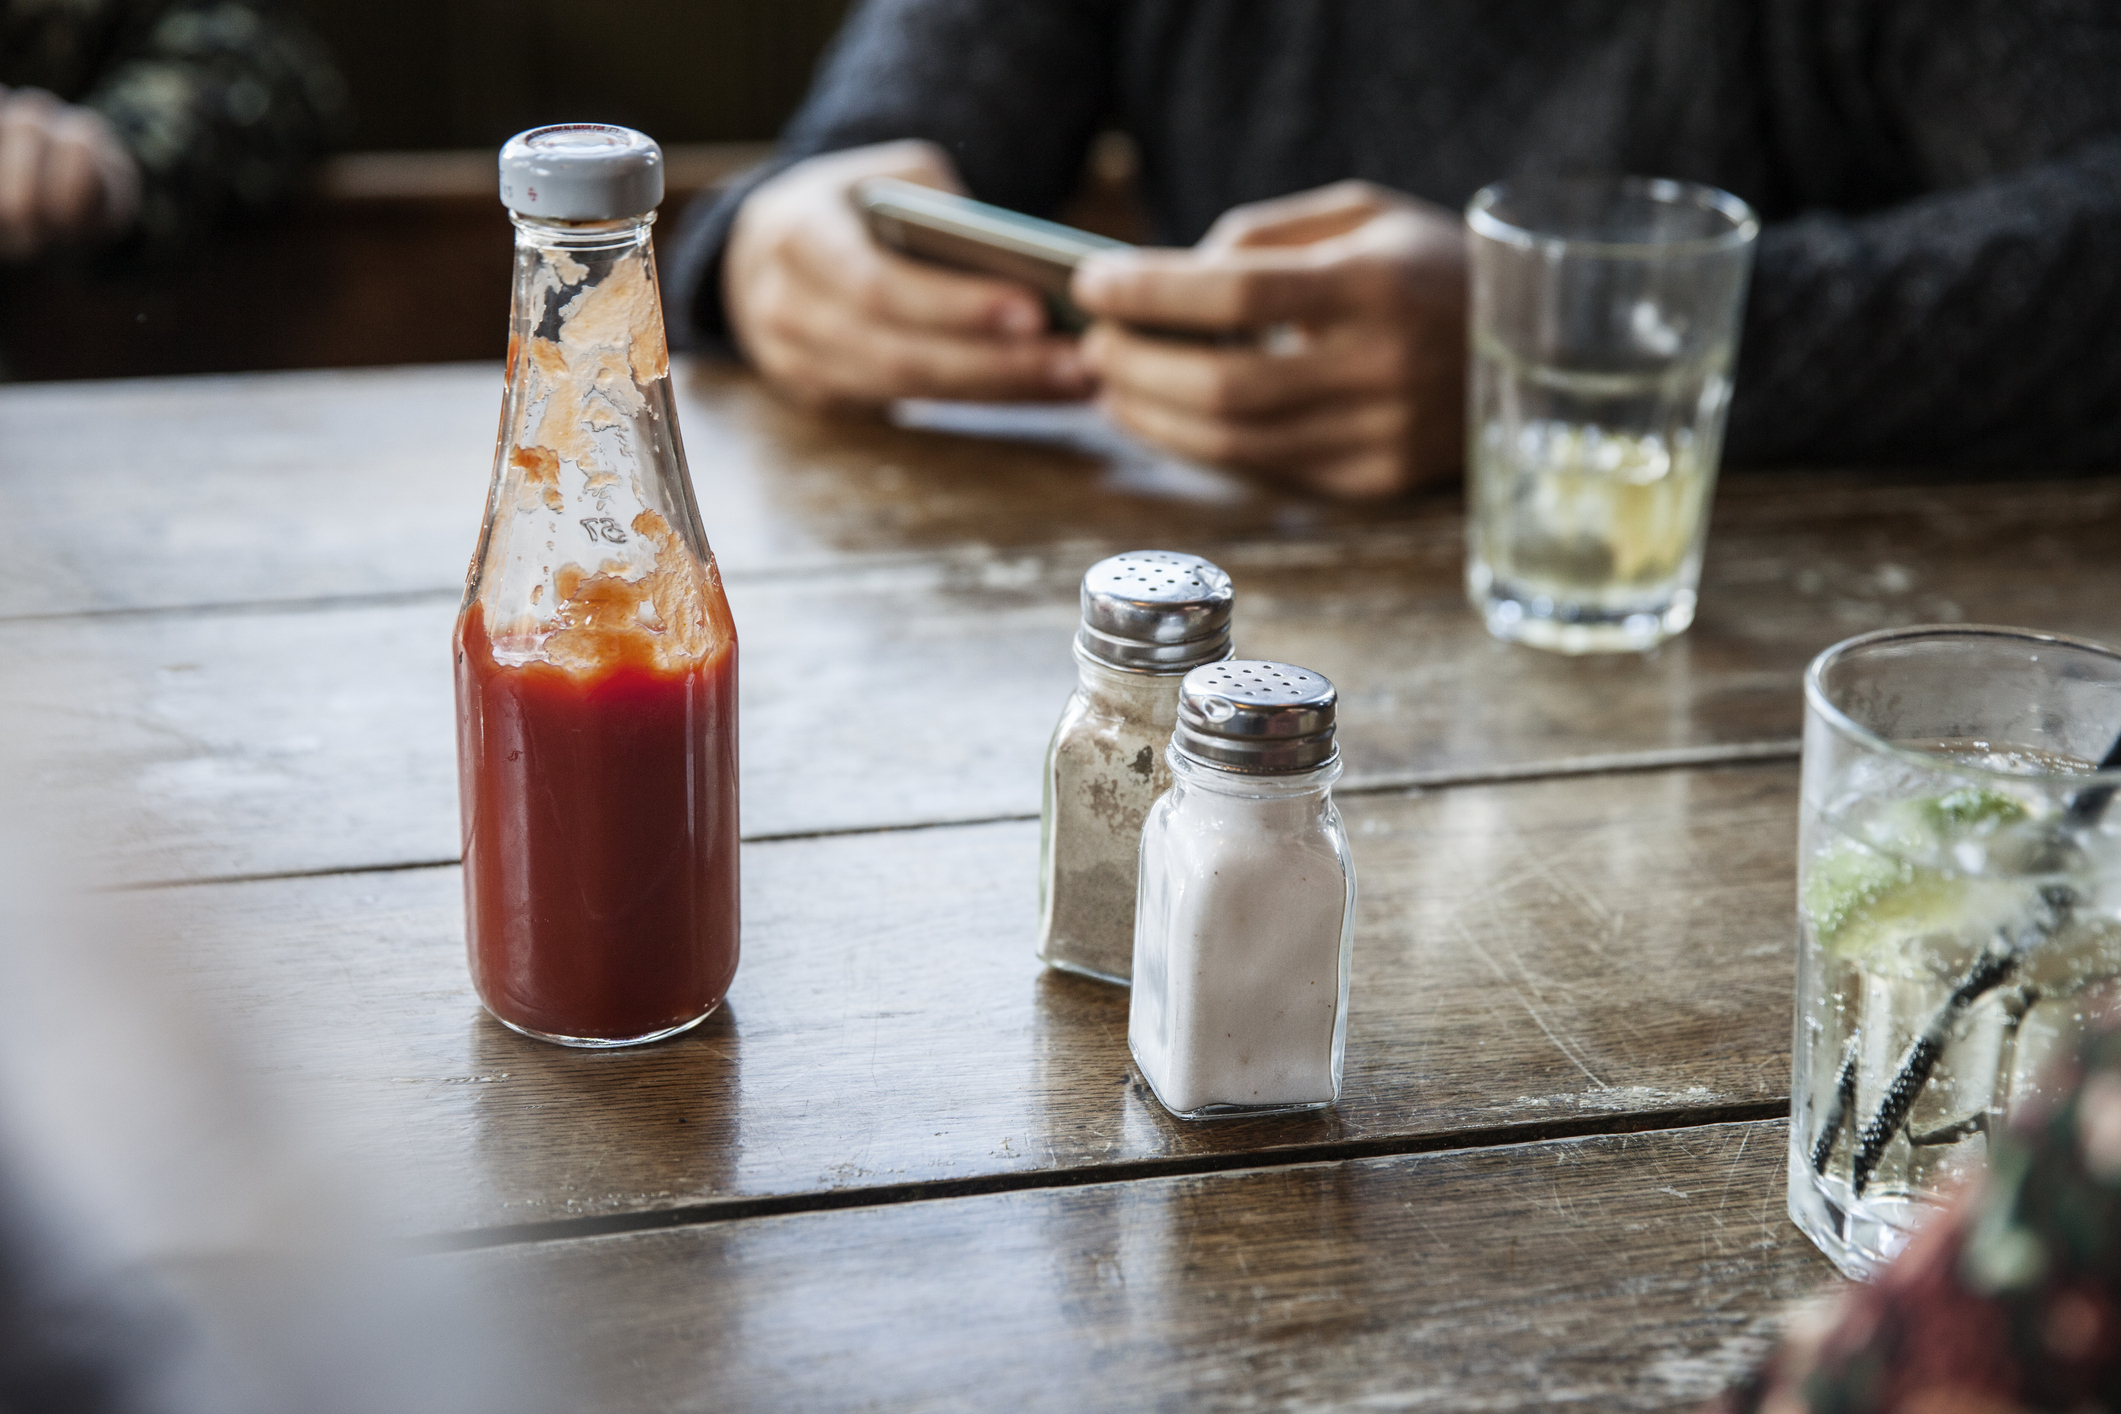 A table with a ketchup bottle, salt and pepper, and glasses on it